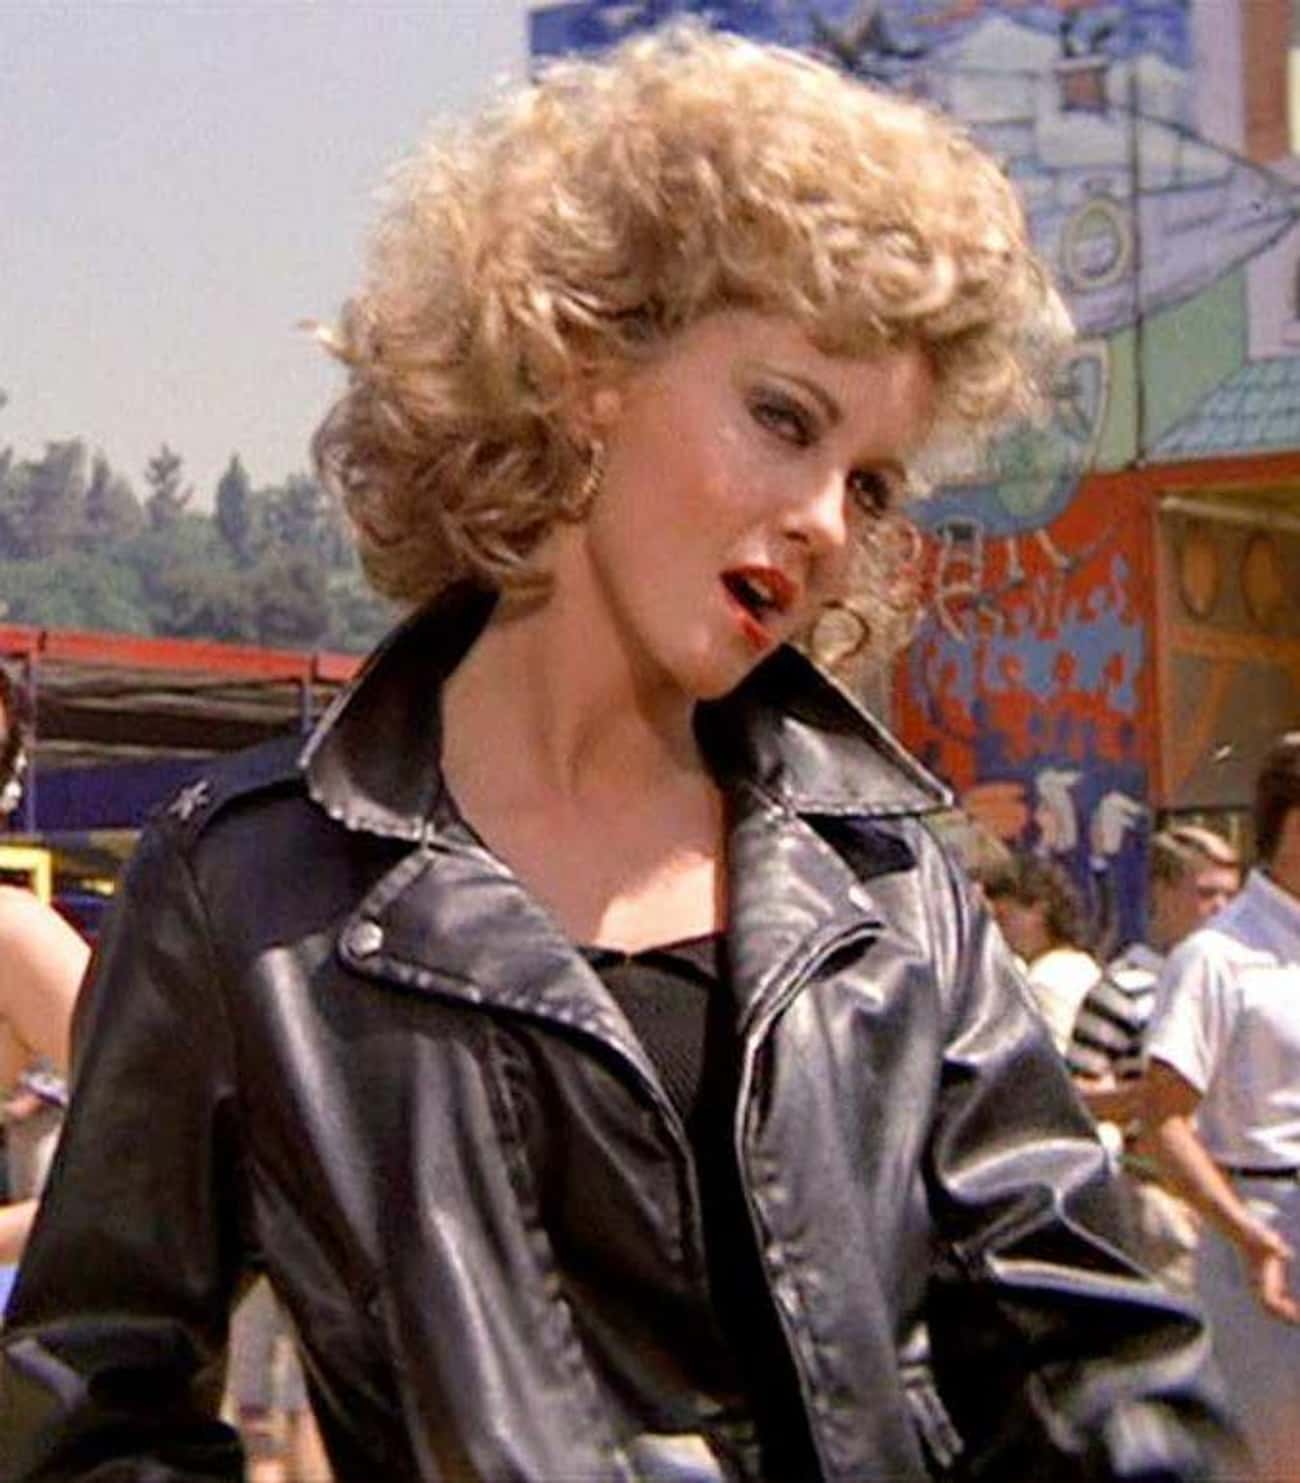 'Grease' - Change Yourself To Make Others Happy